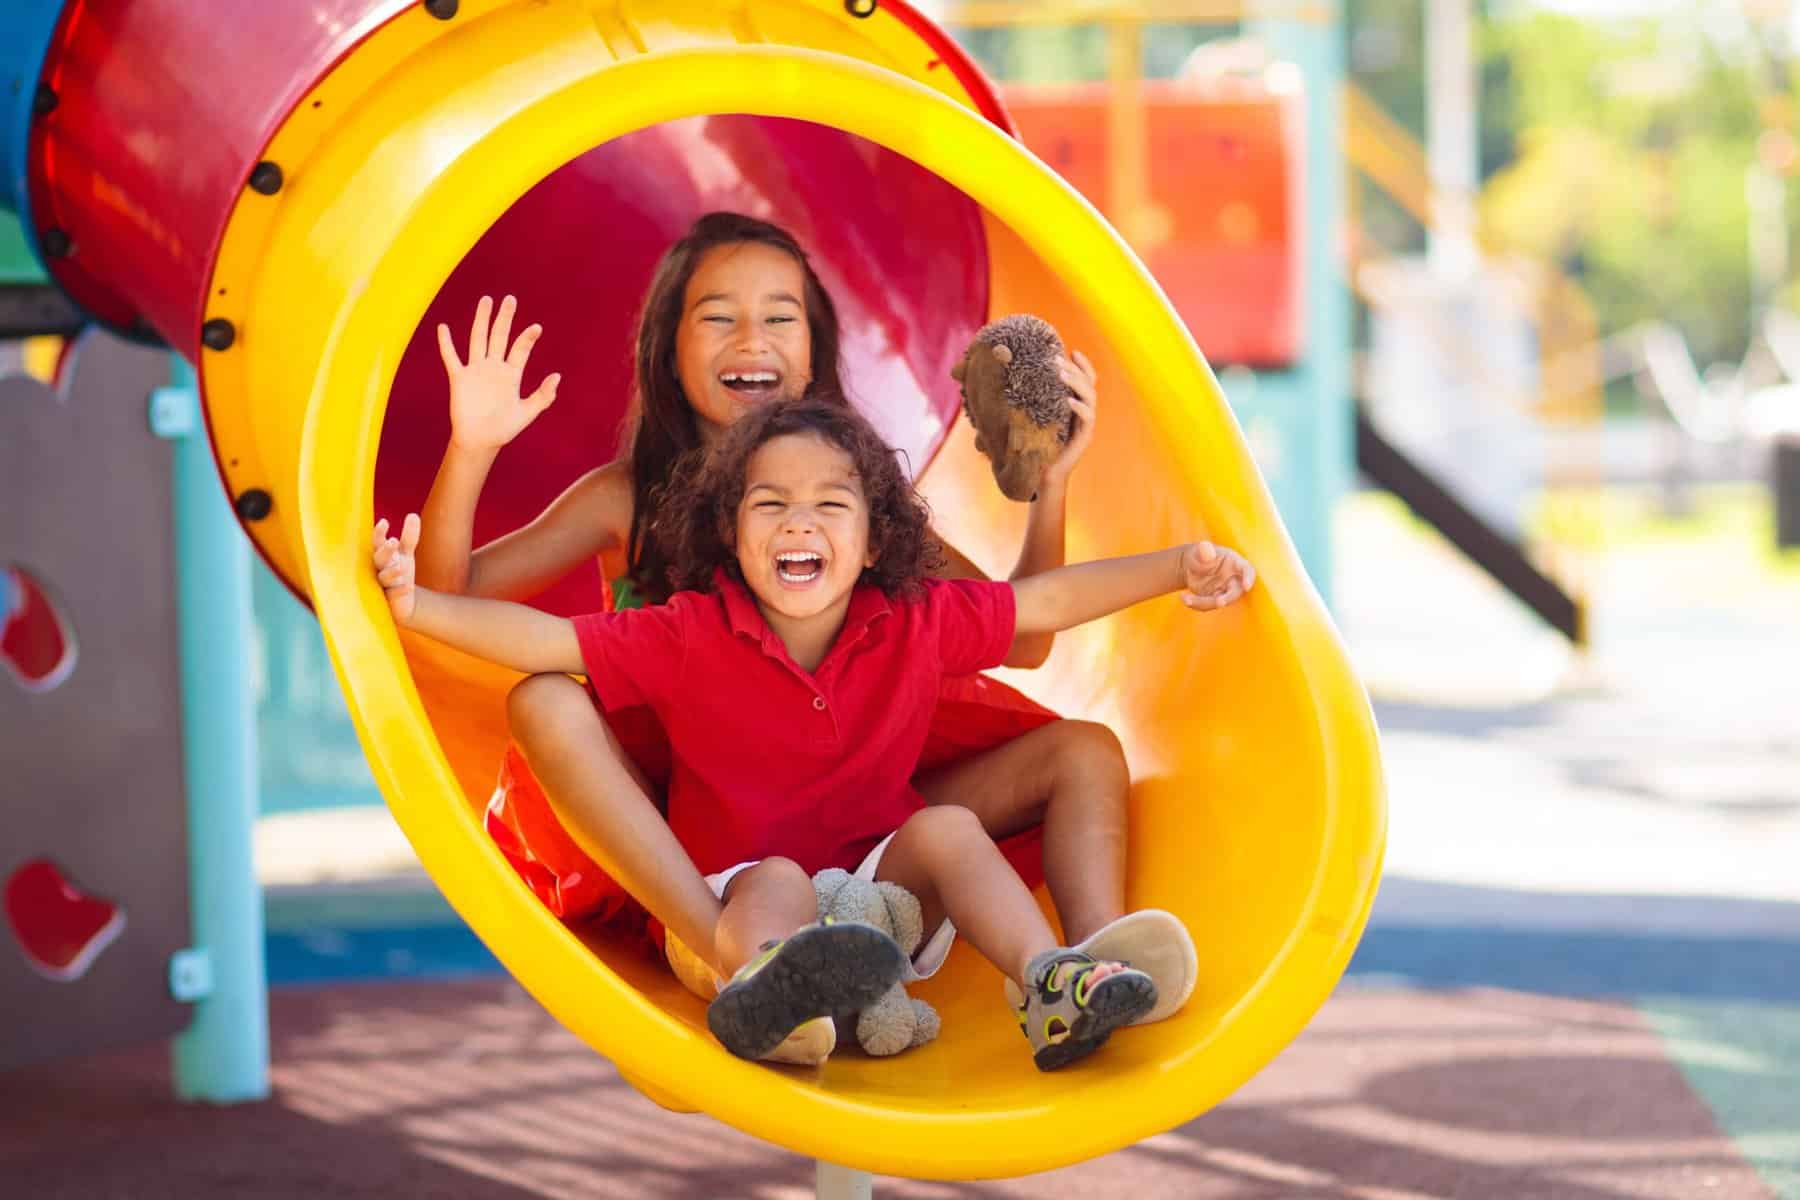 Two children in a slide at the playground